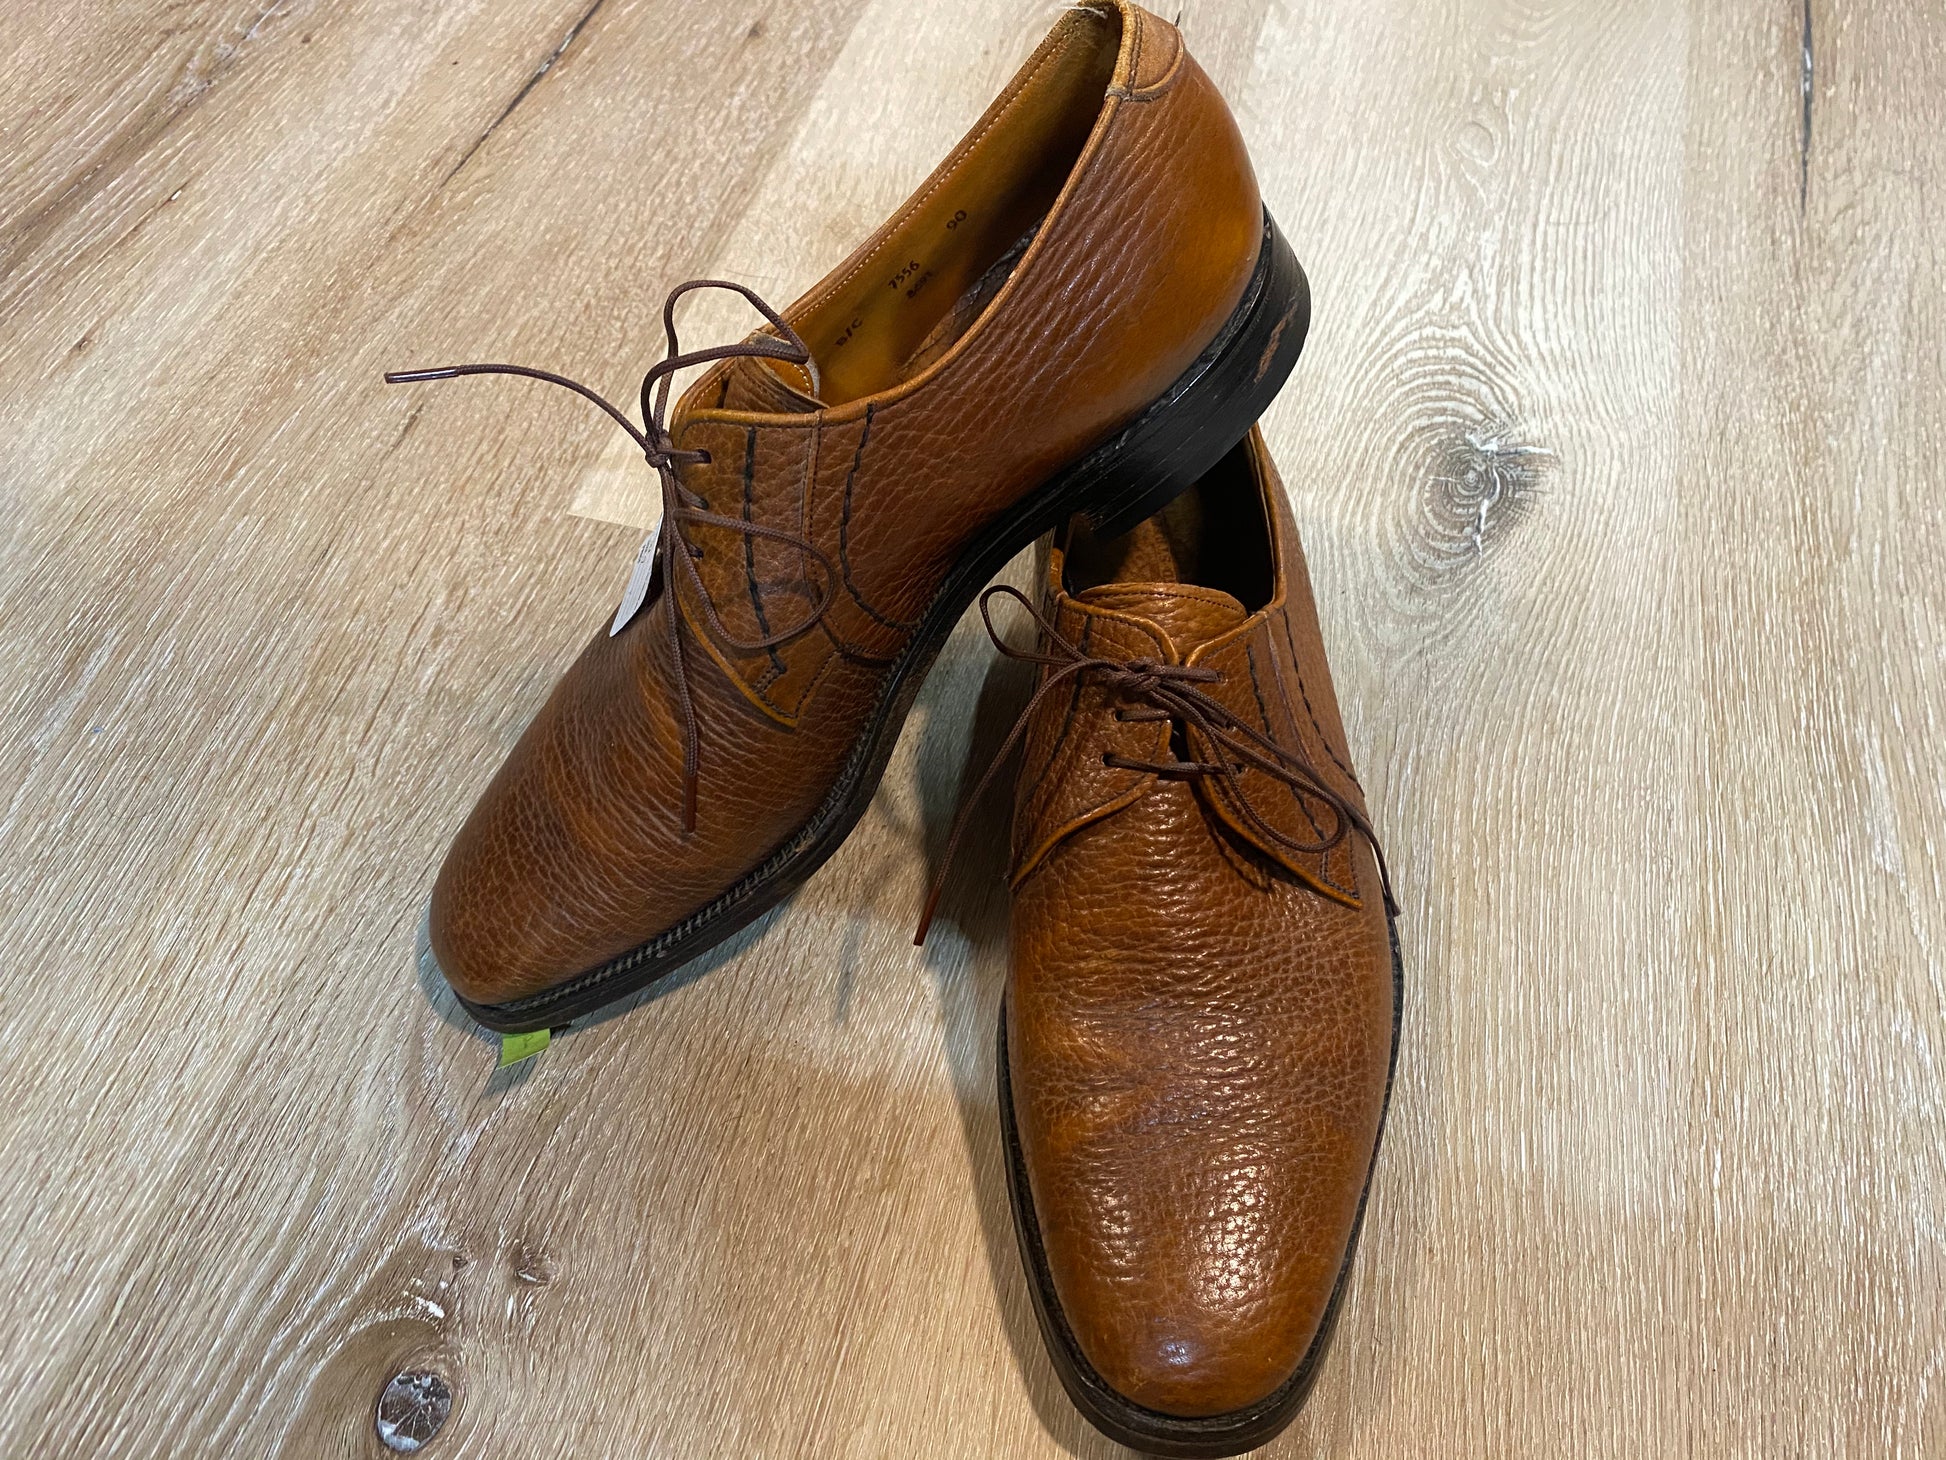 Kingspier Vintage - Brown Plain Toe Derbies by Dack’s The Bondstreet Shoe - Sizes: 9M 11W 42EURO, Made in England, Leather Soles and Insoles, Phillips Cushion No Mark Heels